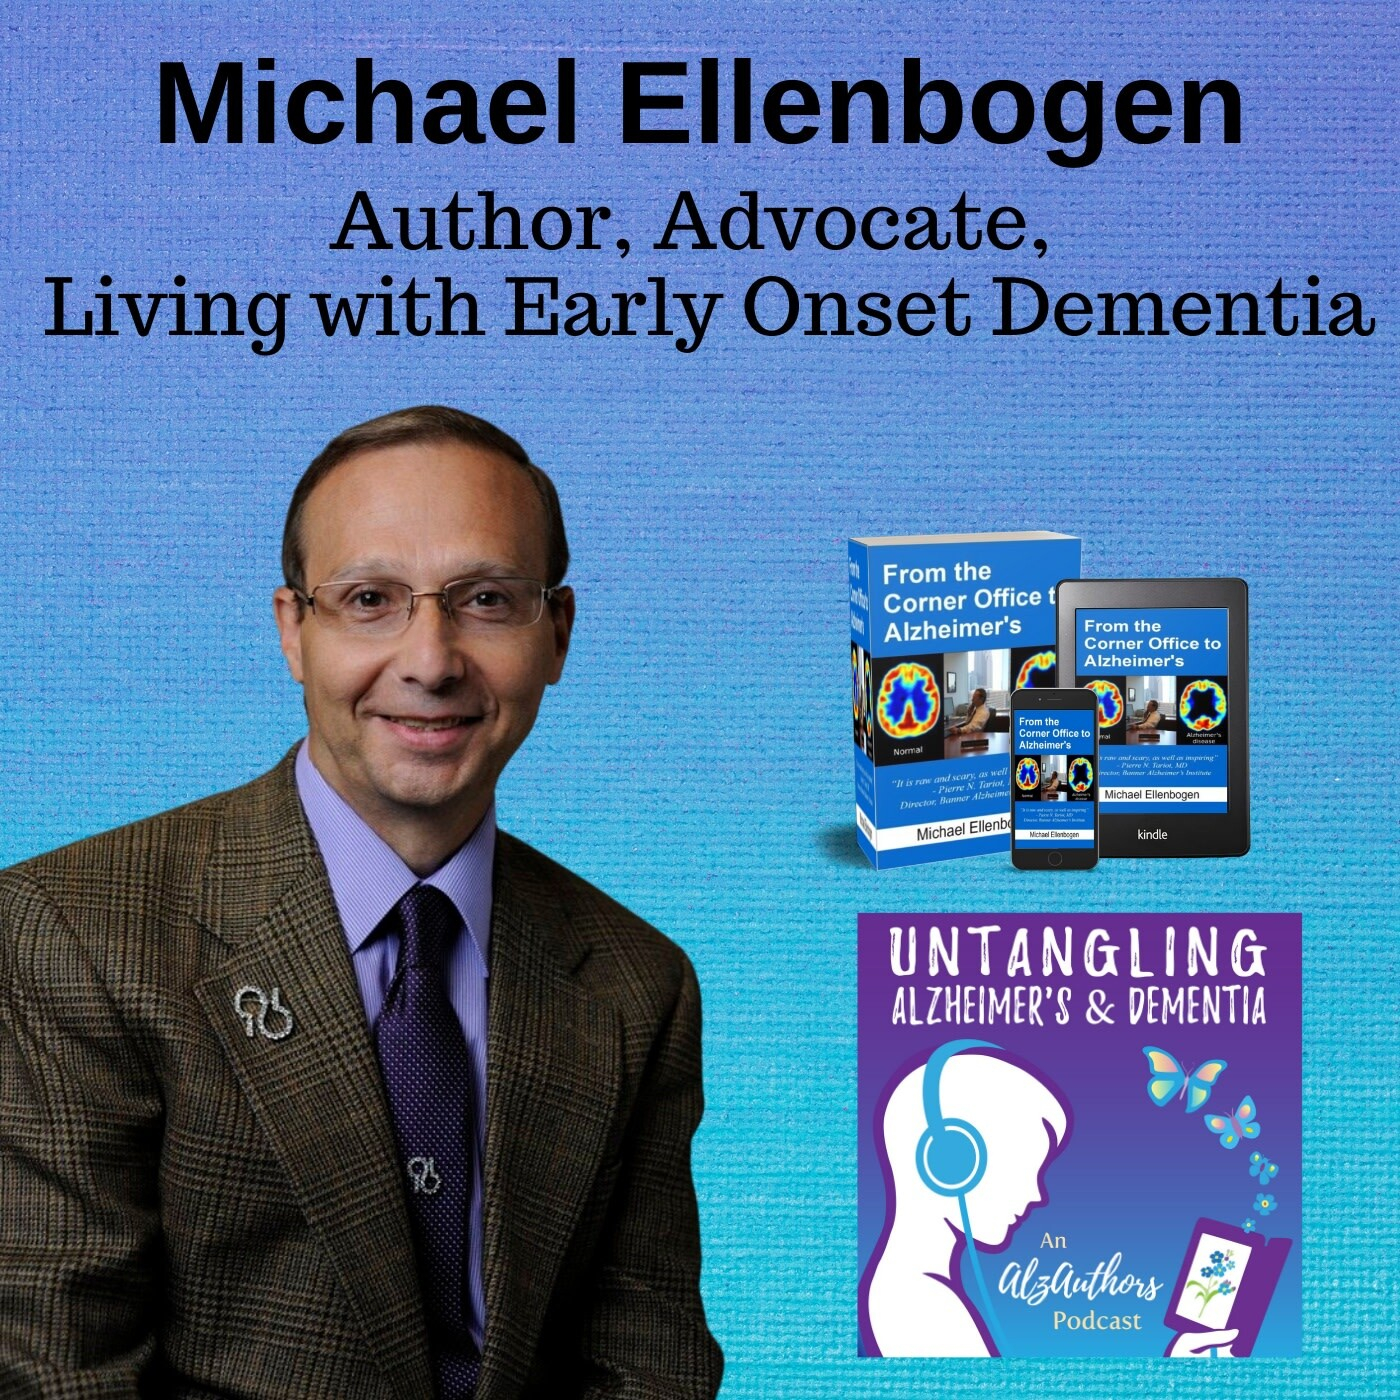 Untangling Life From the Corner Office to Alzheimer's with Michael Ellenbogen